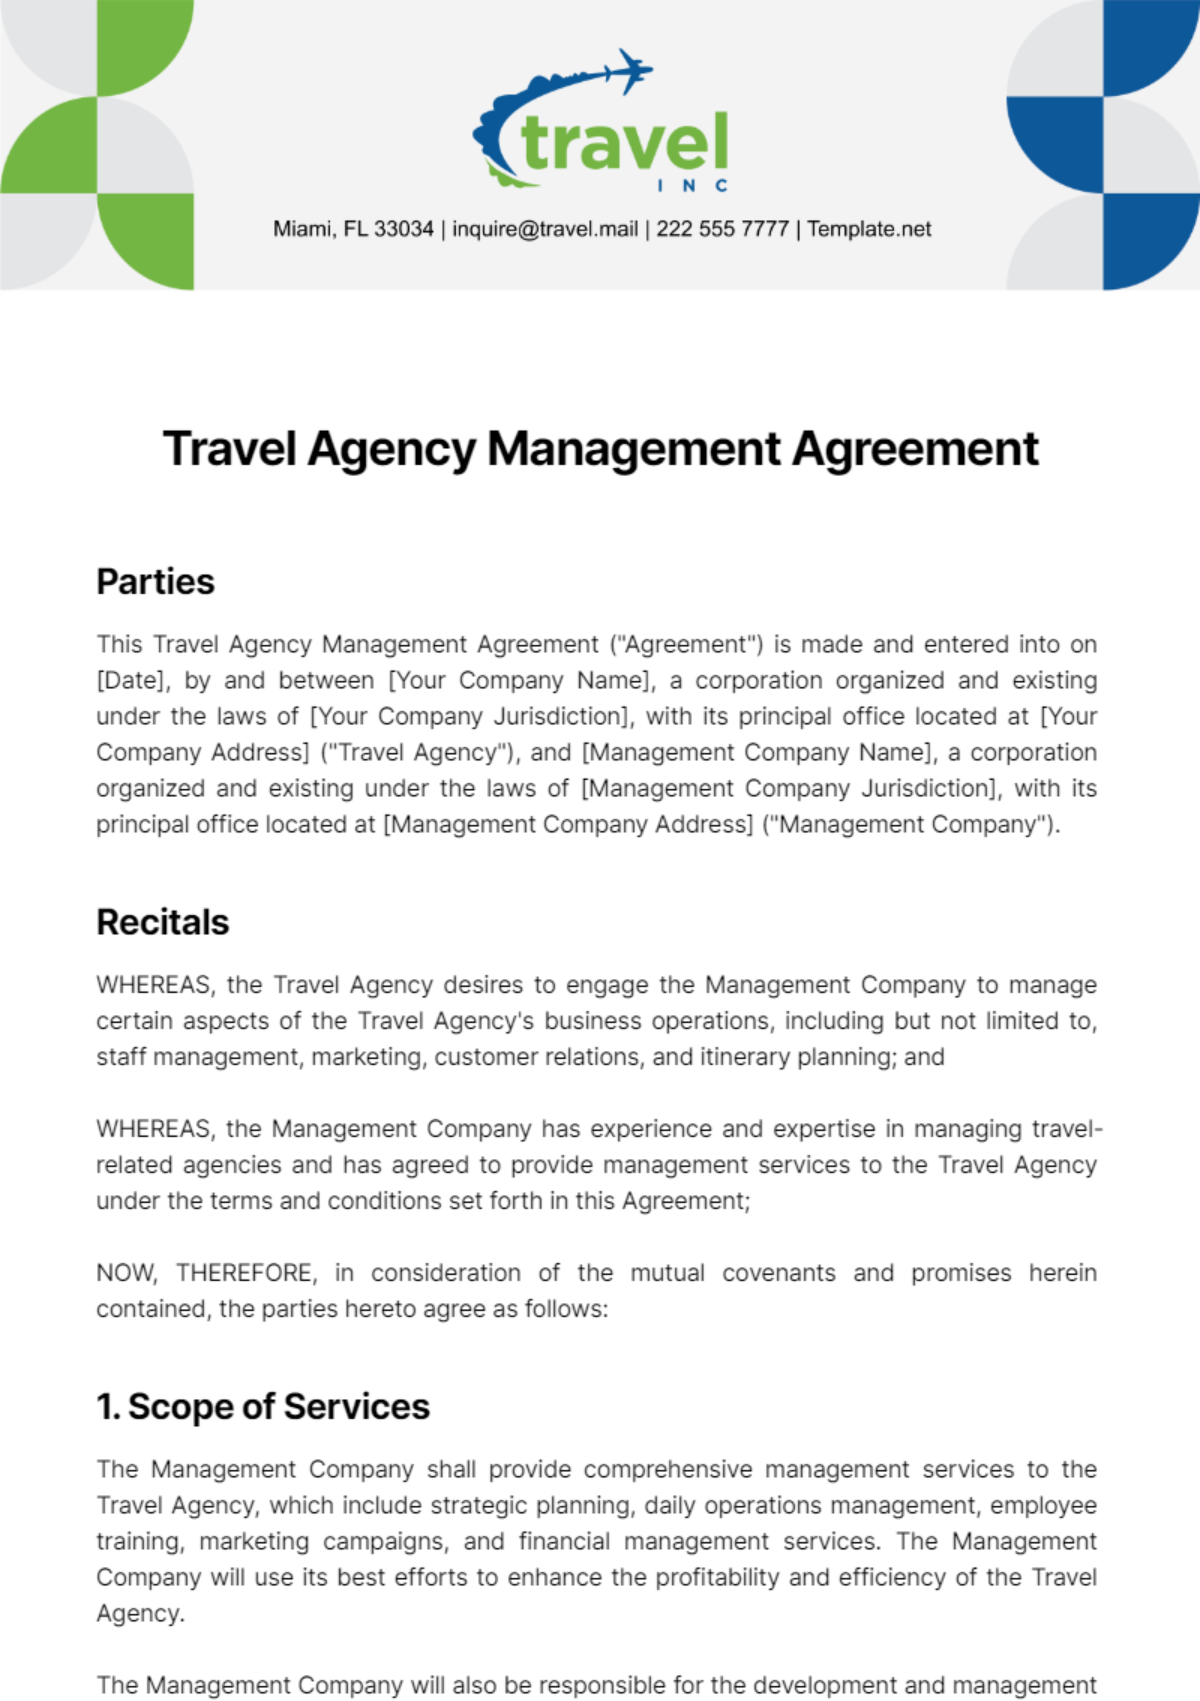 Travel Agency Management Agreement Template